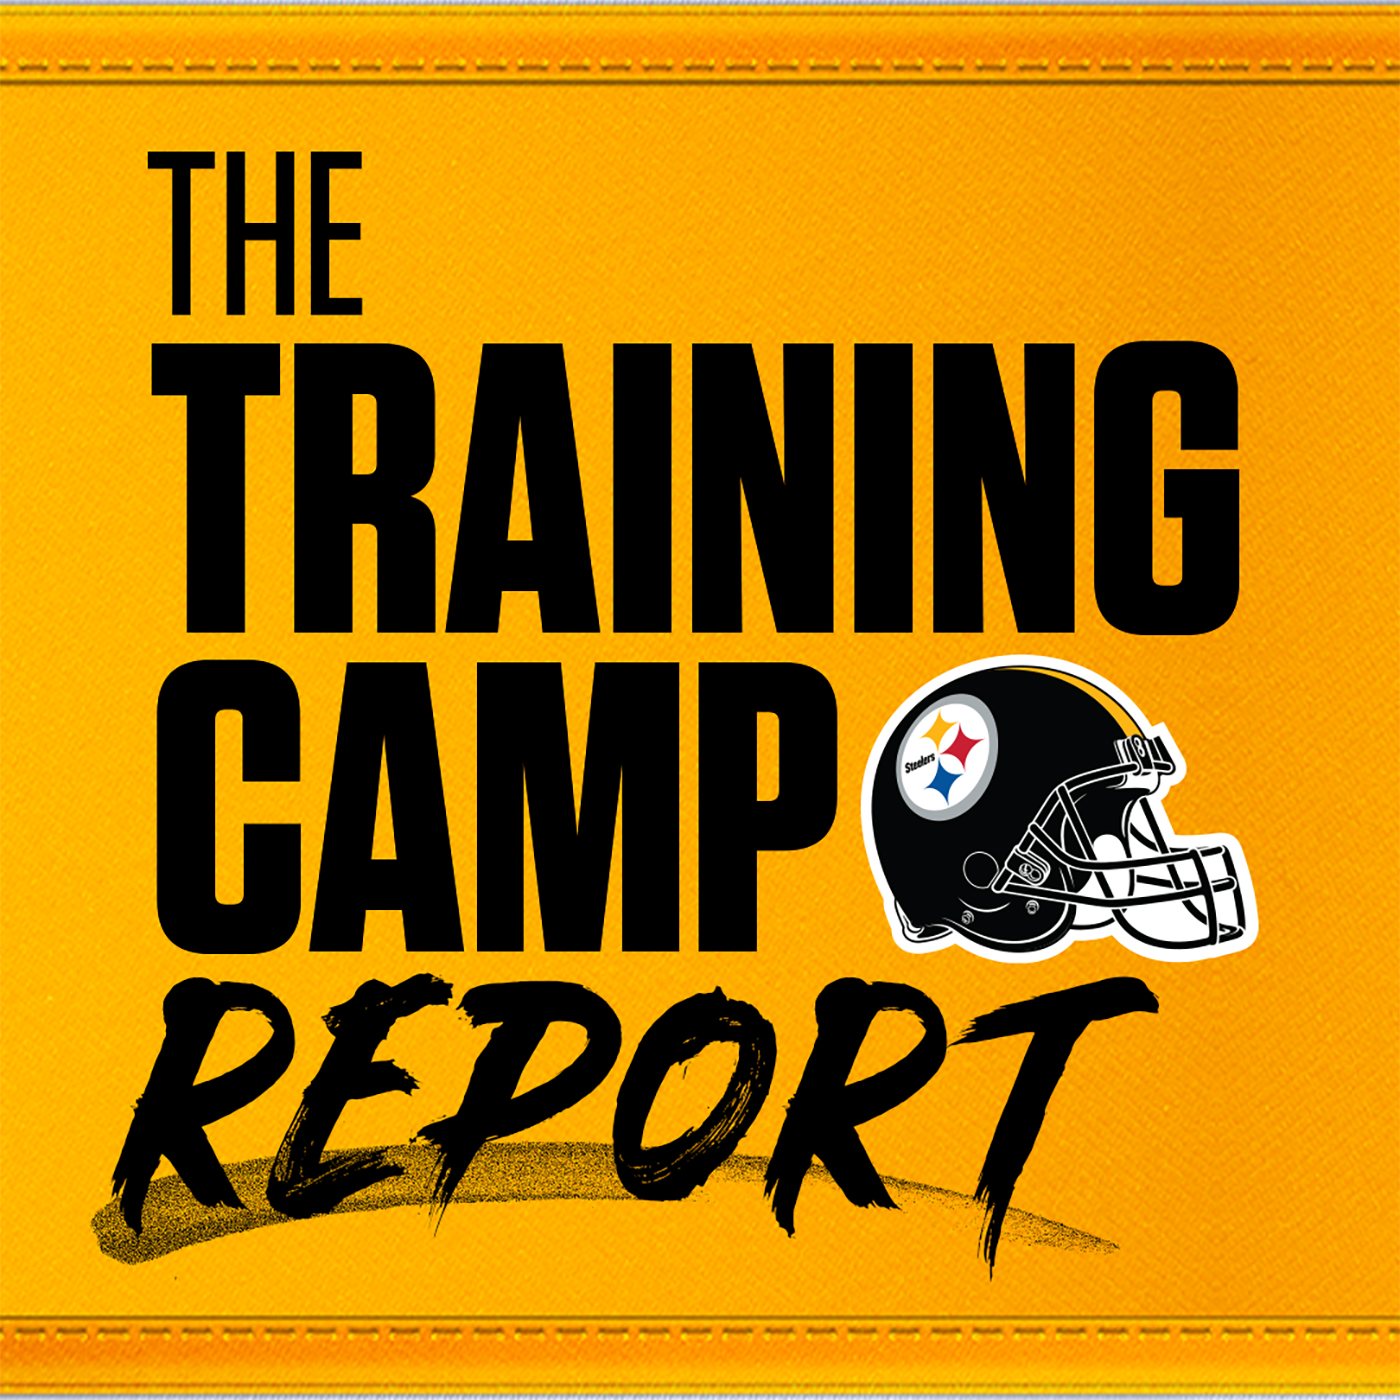 The Training Camp Report - Day 7